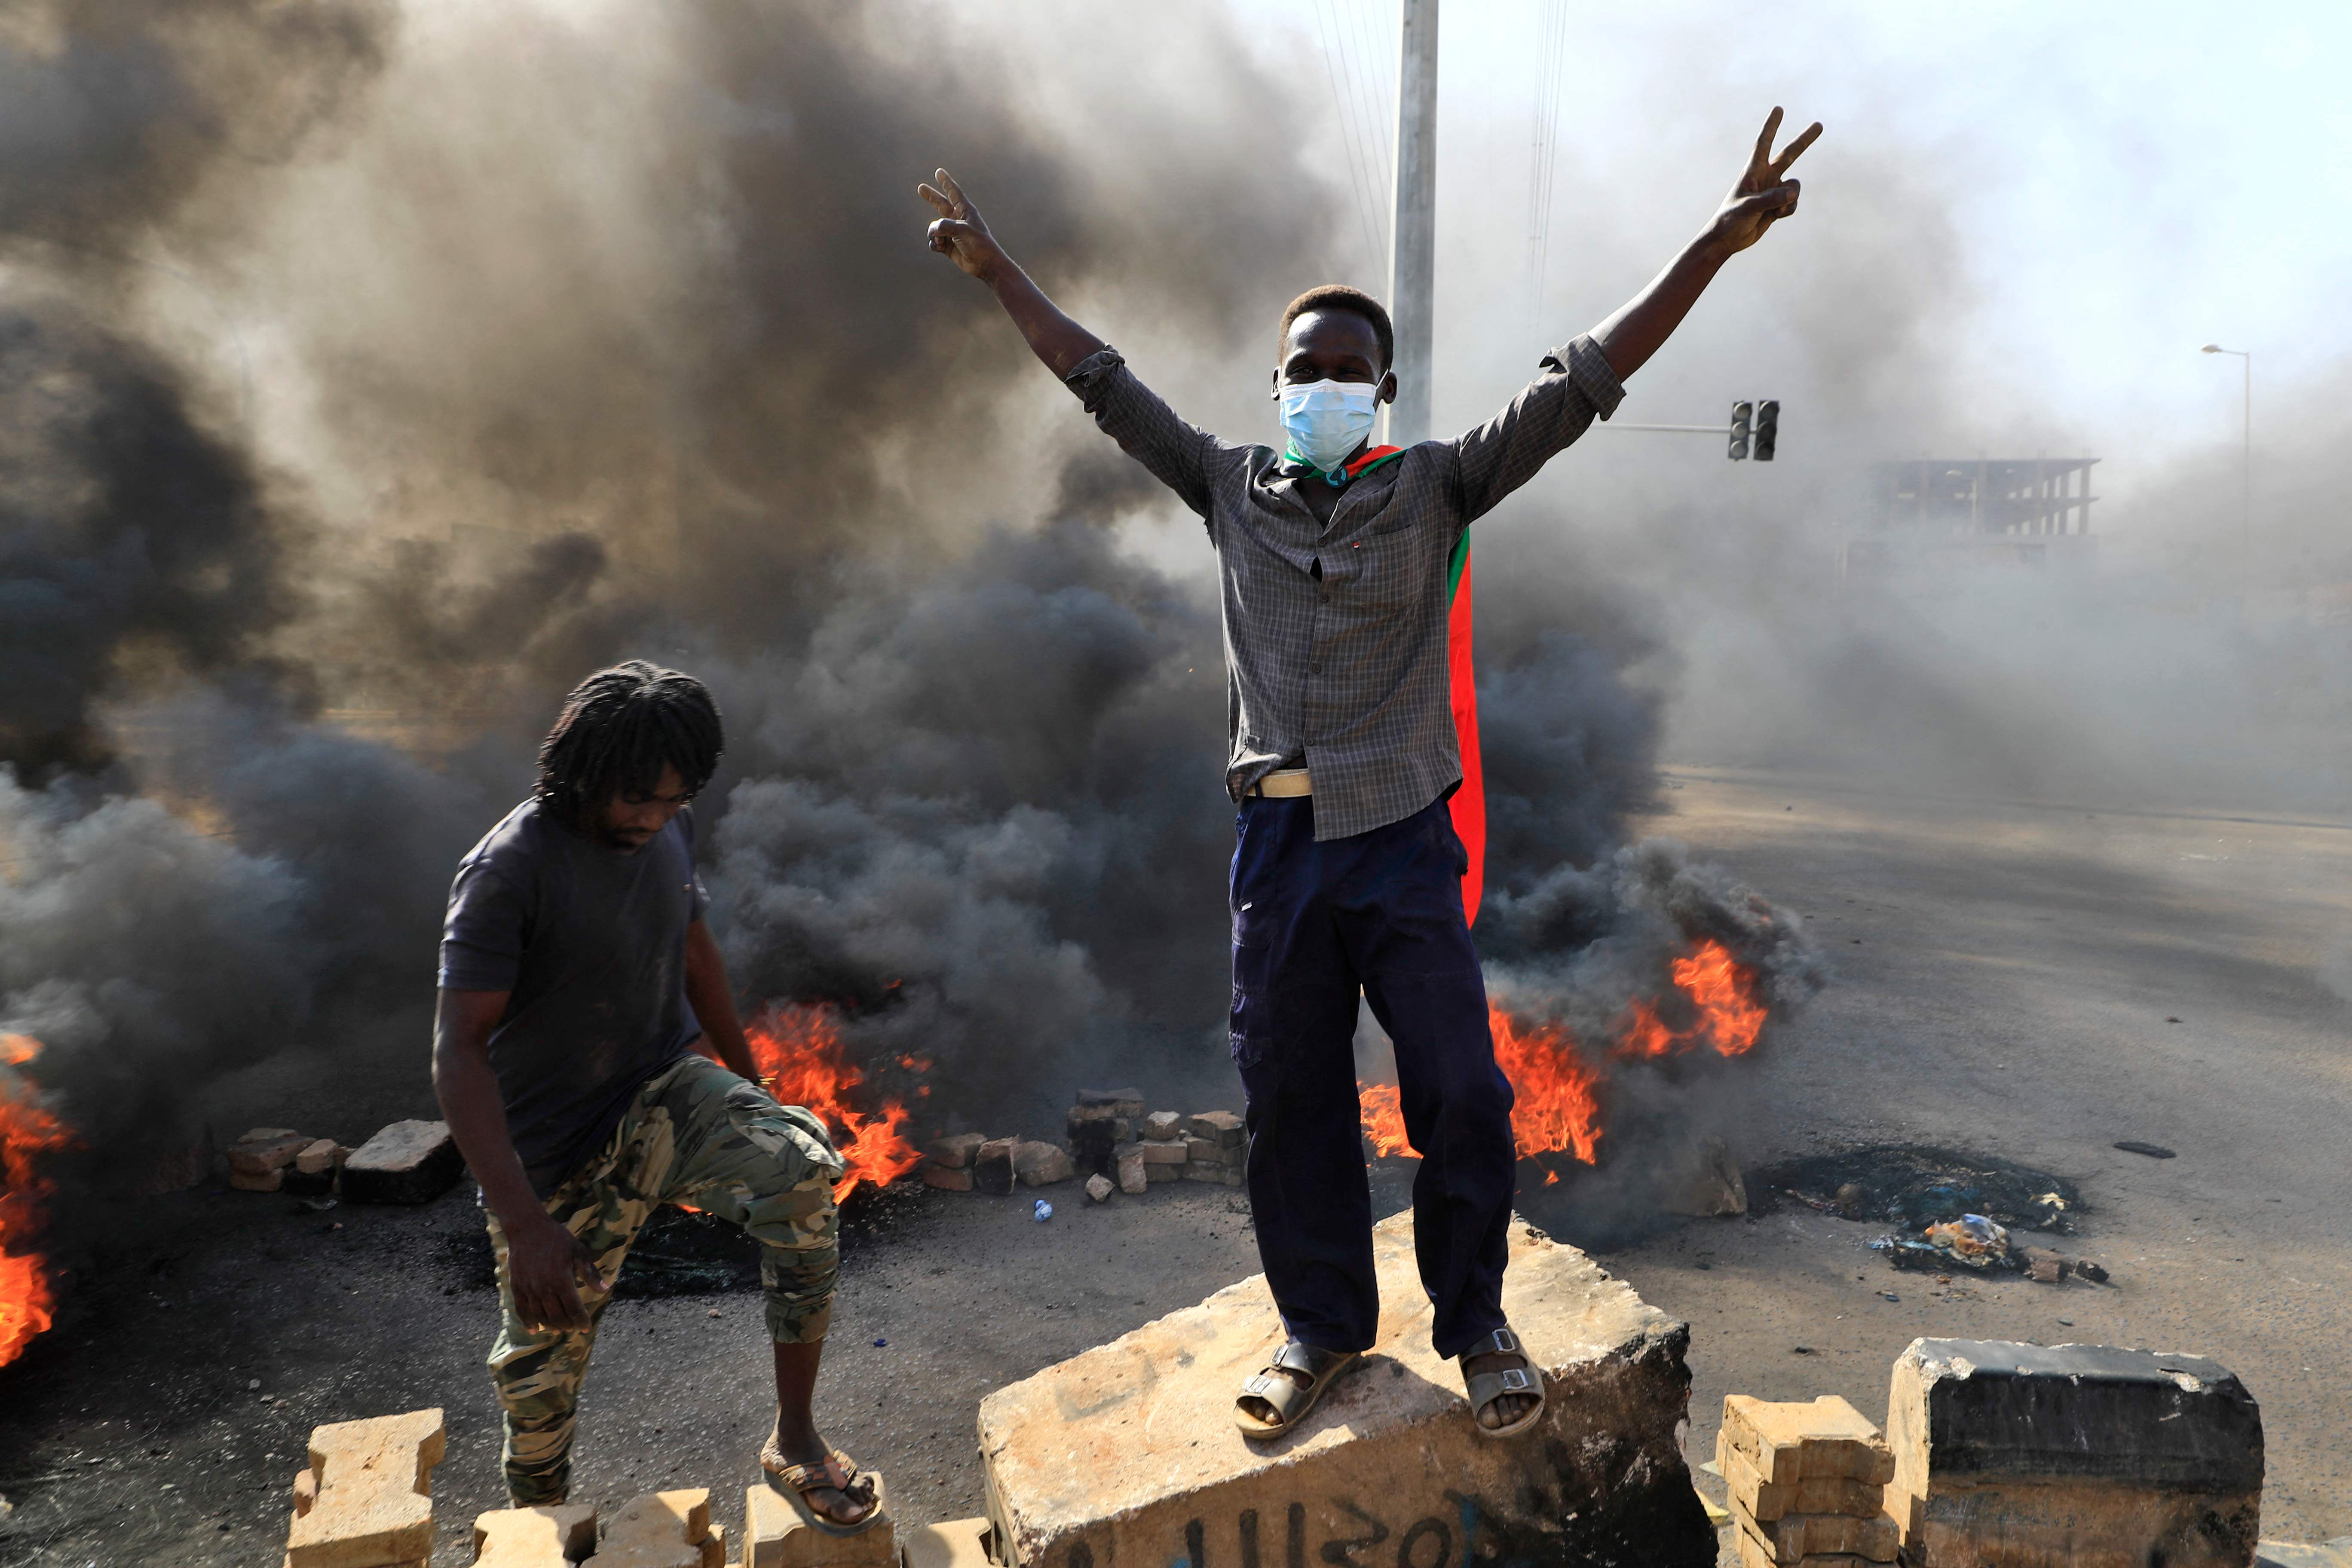 Protesters burn tyres to block a road in the capital Khartoum on Monday, denouncing overnight detentions by the army of members of Sudan’s government